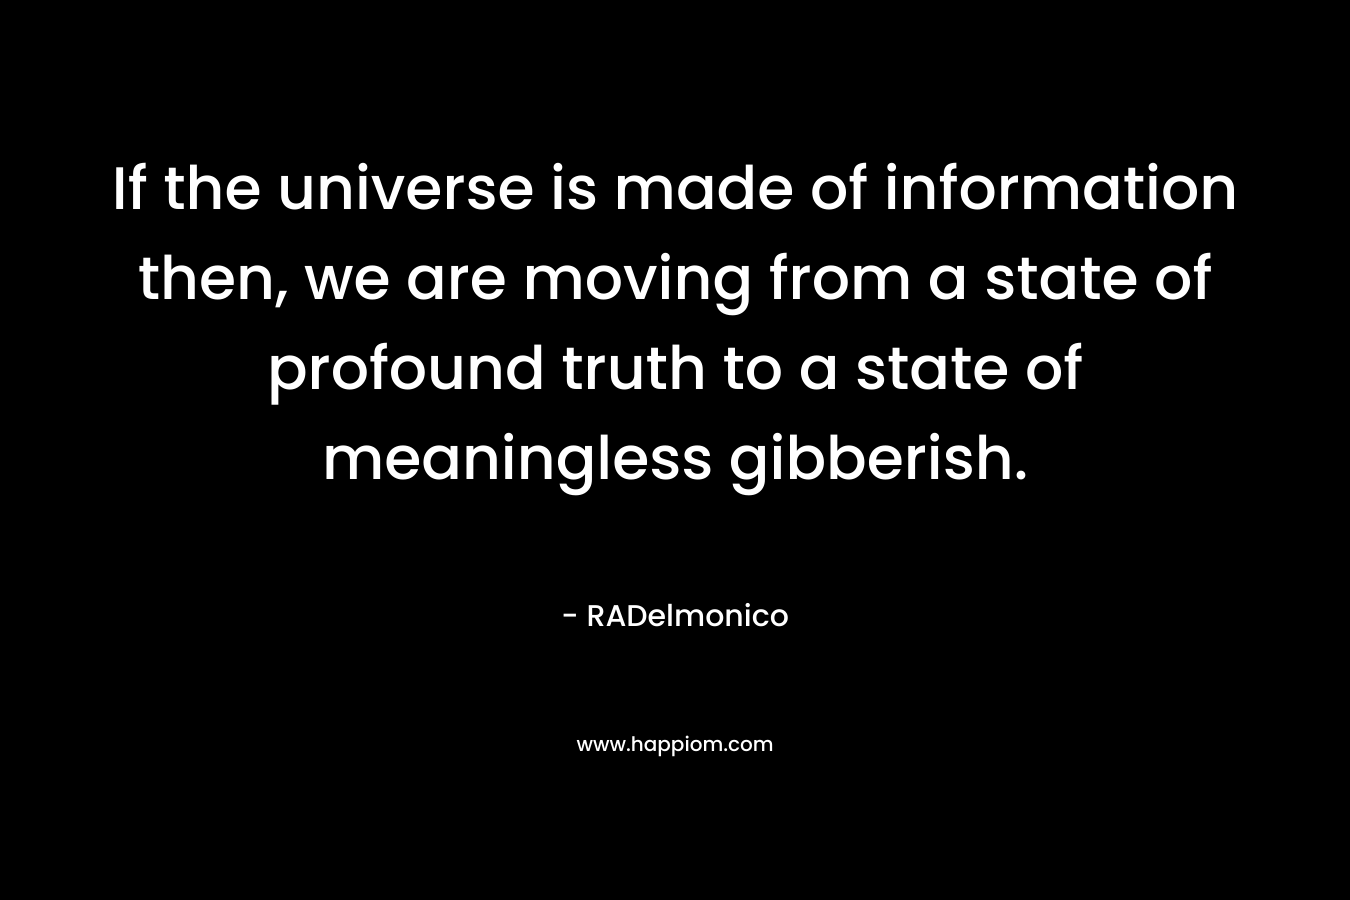 If the universe is made of information then, we are moving from a state of profound truth to a state of meaningless gibberish.